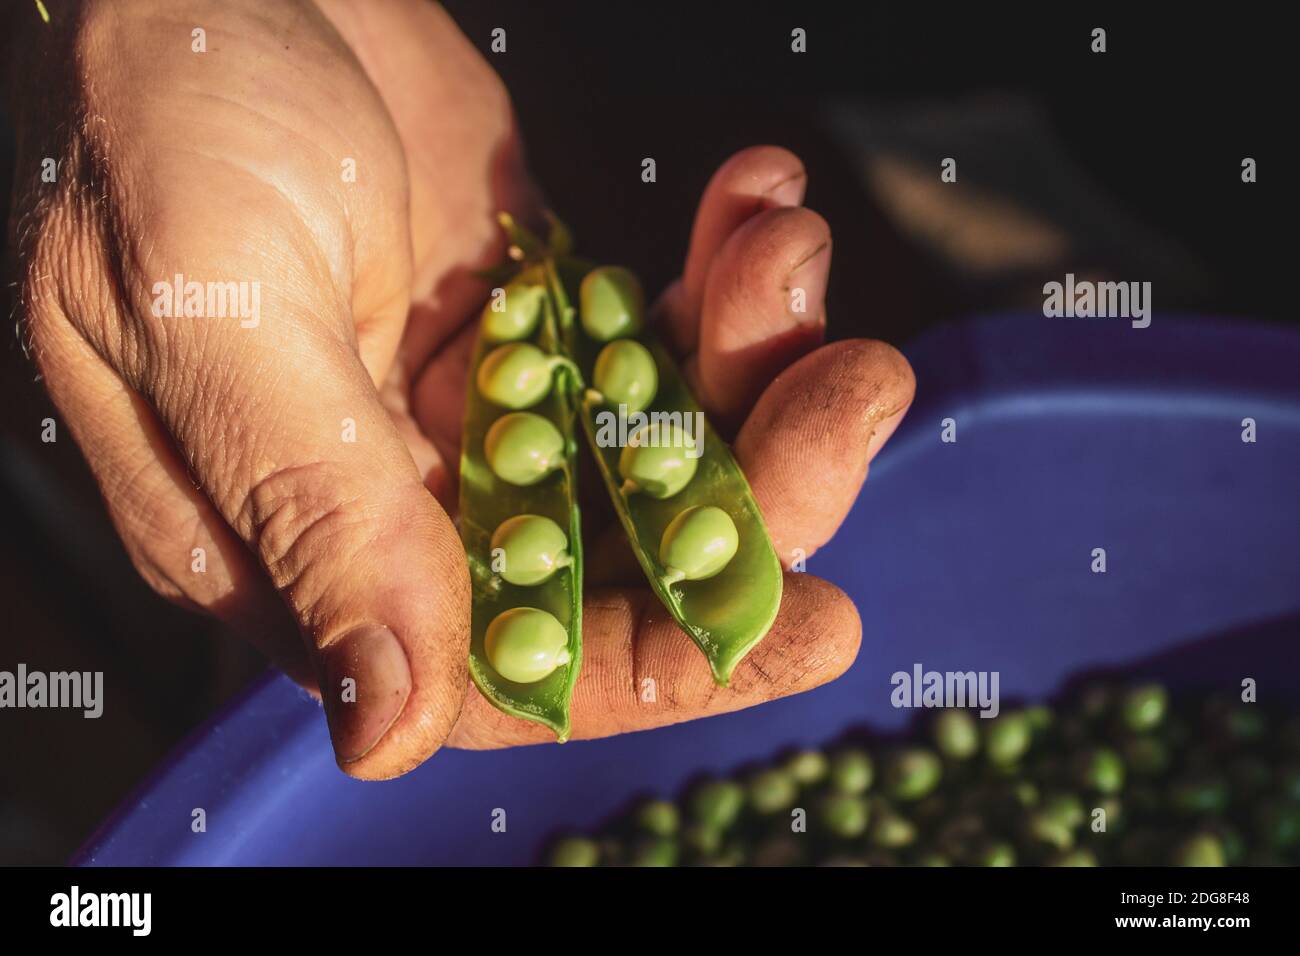 Hard workinhg hand holds green beans and sorting it Stock Photo